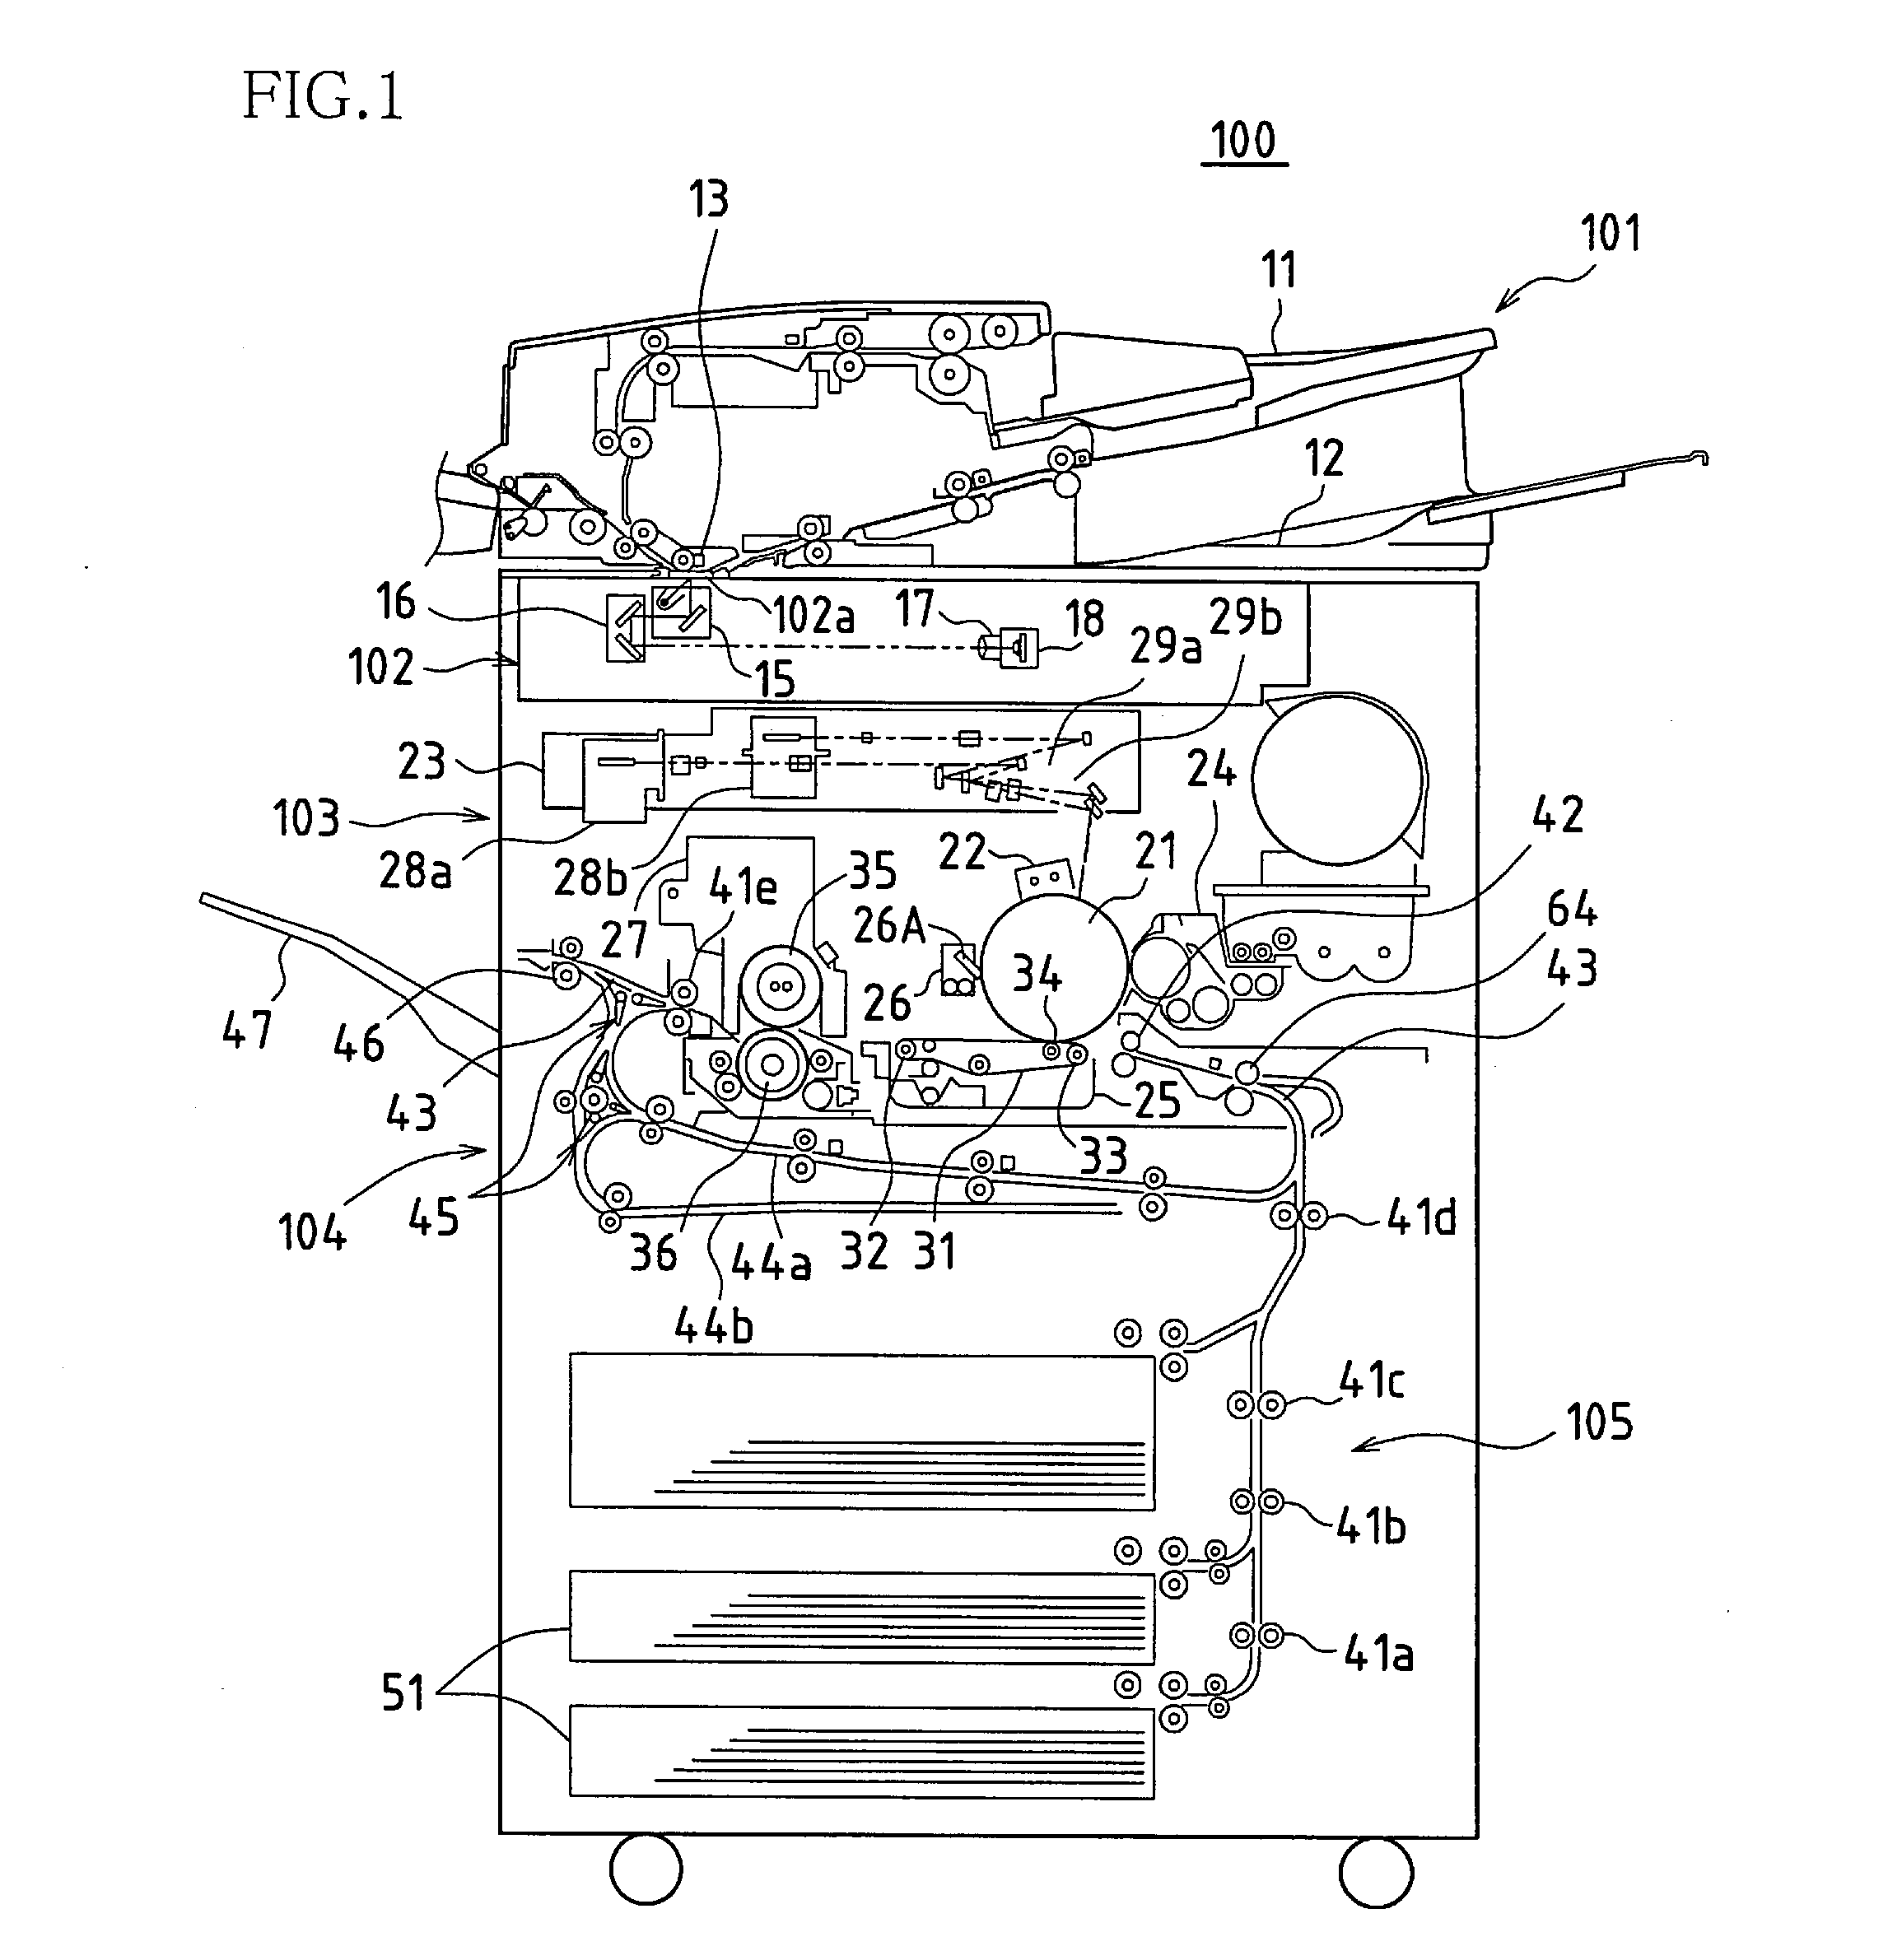 Paper transport path of image forming apparatus